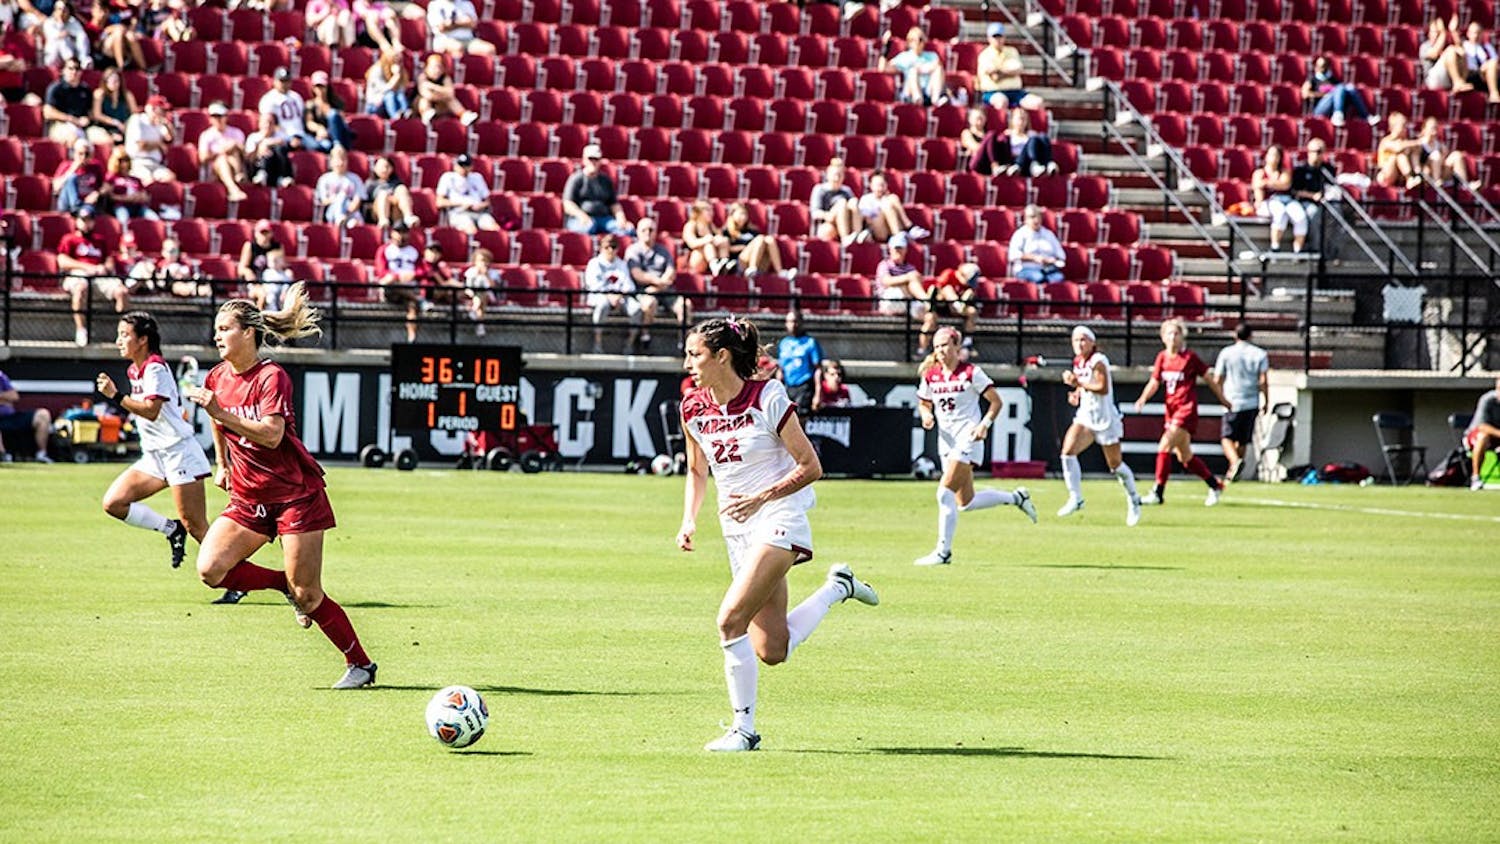 Graduate forward Ryan Gareis runs towards the goal during the South Carolina versus Alabama soccer game on Oct. 24, 2021. The Gamecocks lost 2-1 to the Auburn Tigers in the quarterfinals of the SEC Tournament.&nbsp;